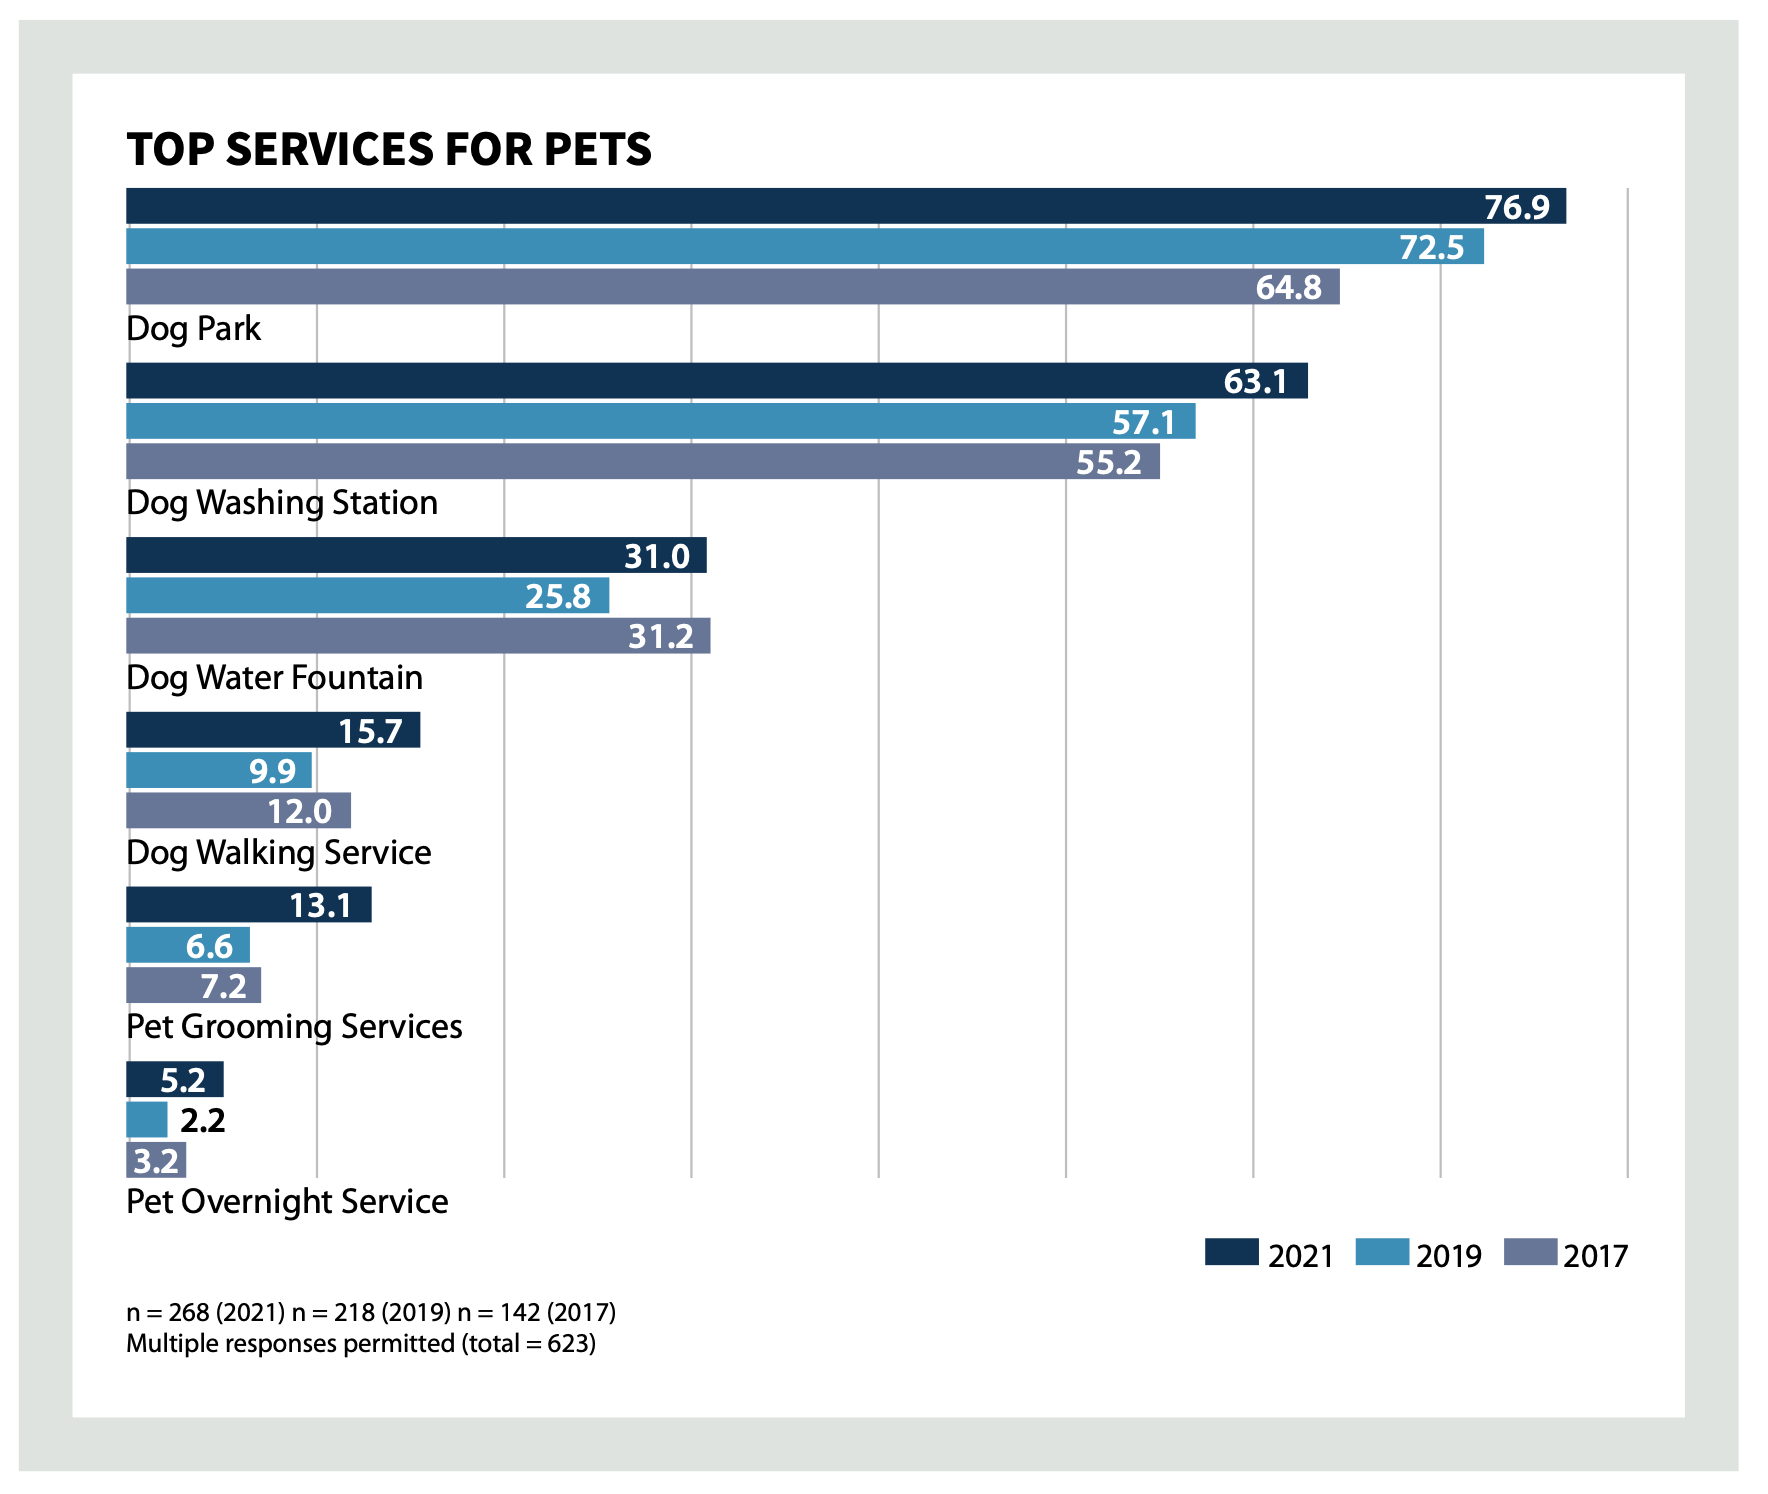 Top pet services for multifamily developments in 2021